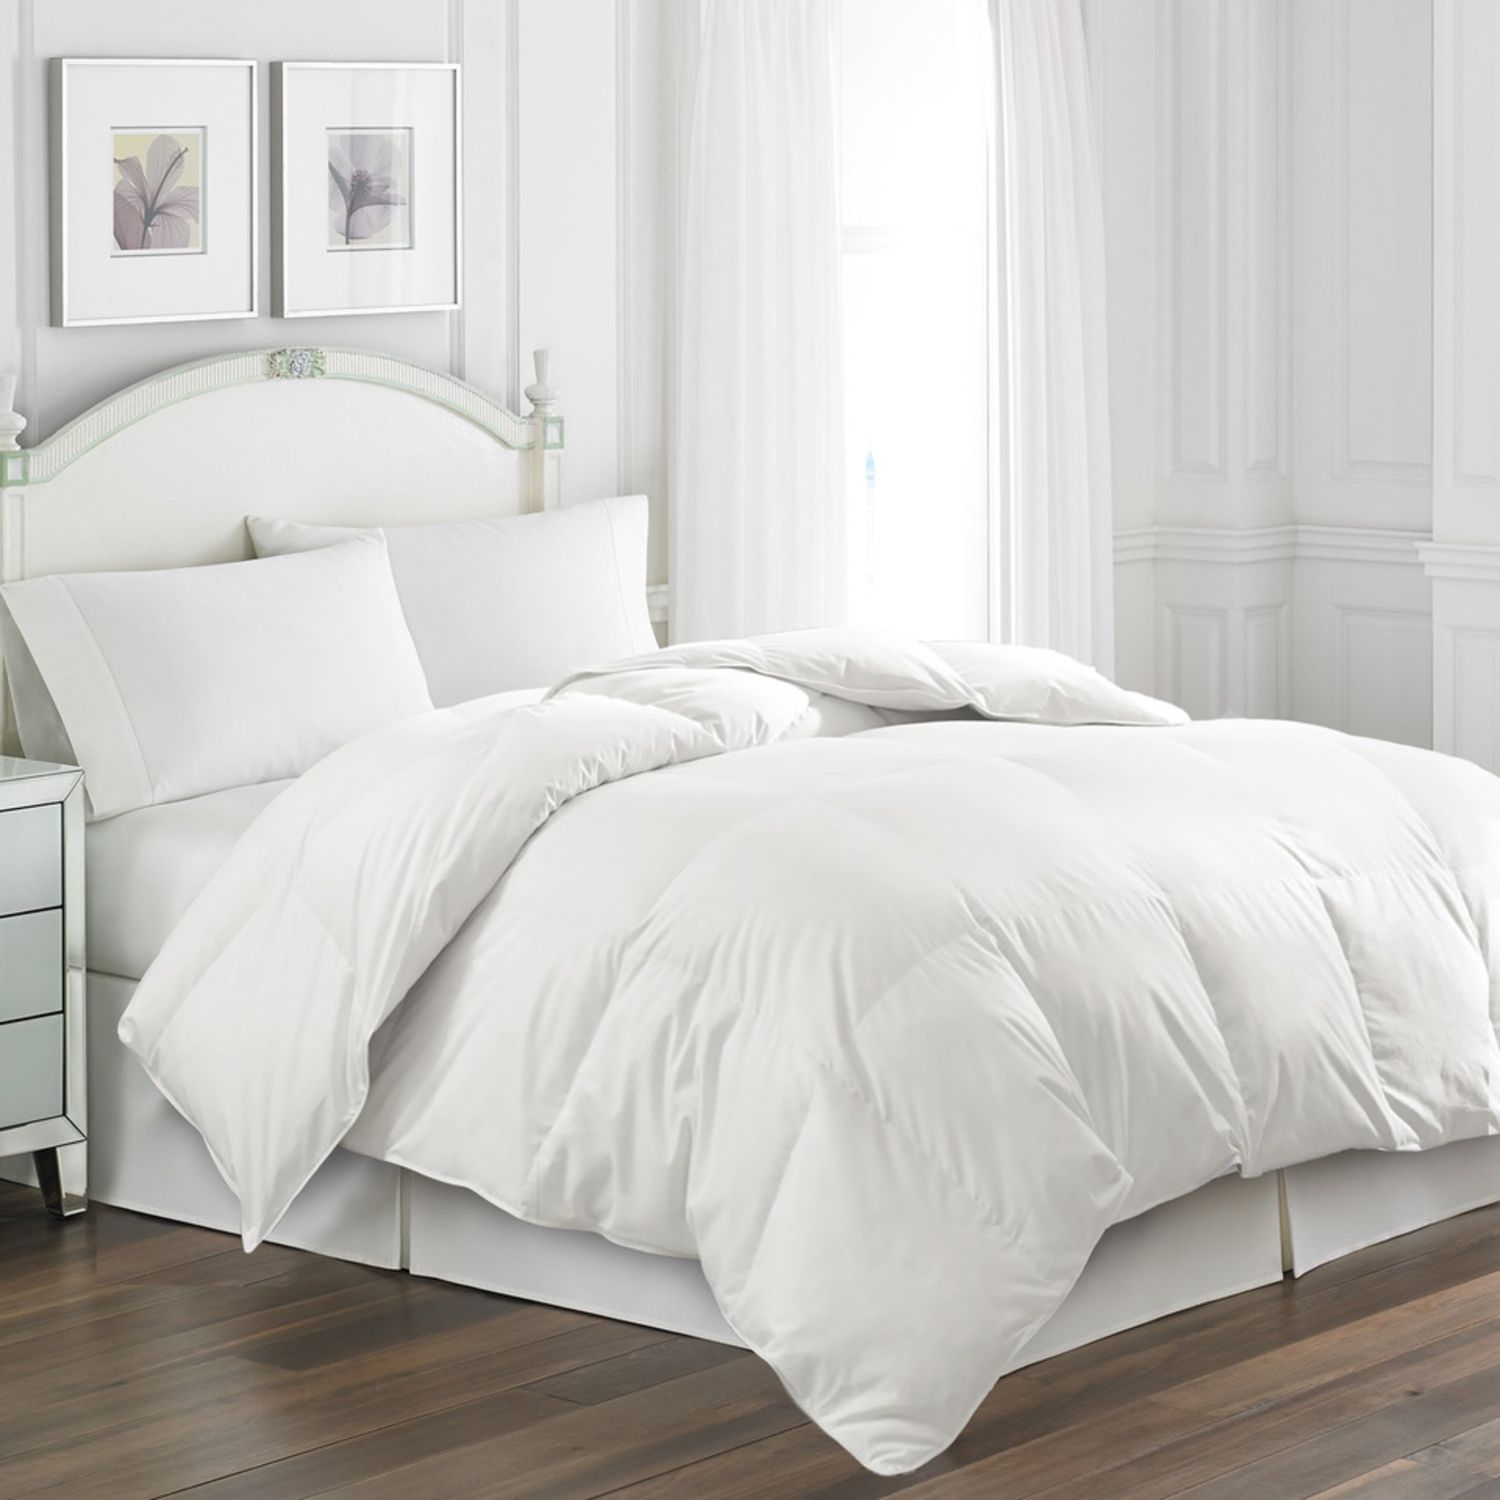 white feather down comforter